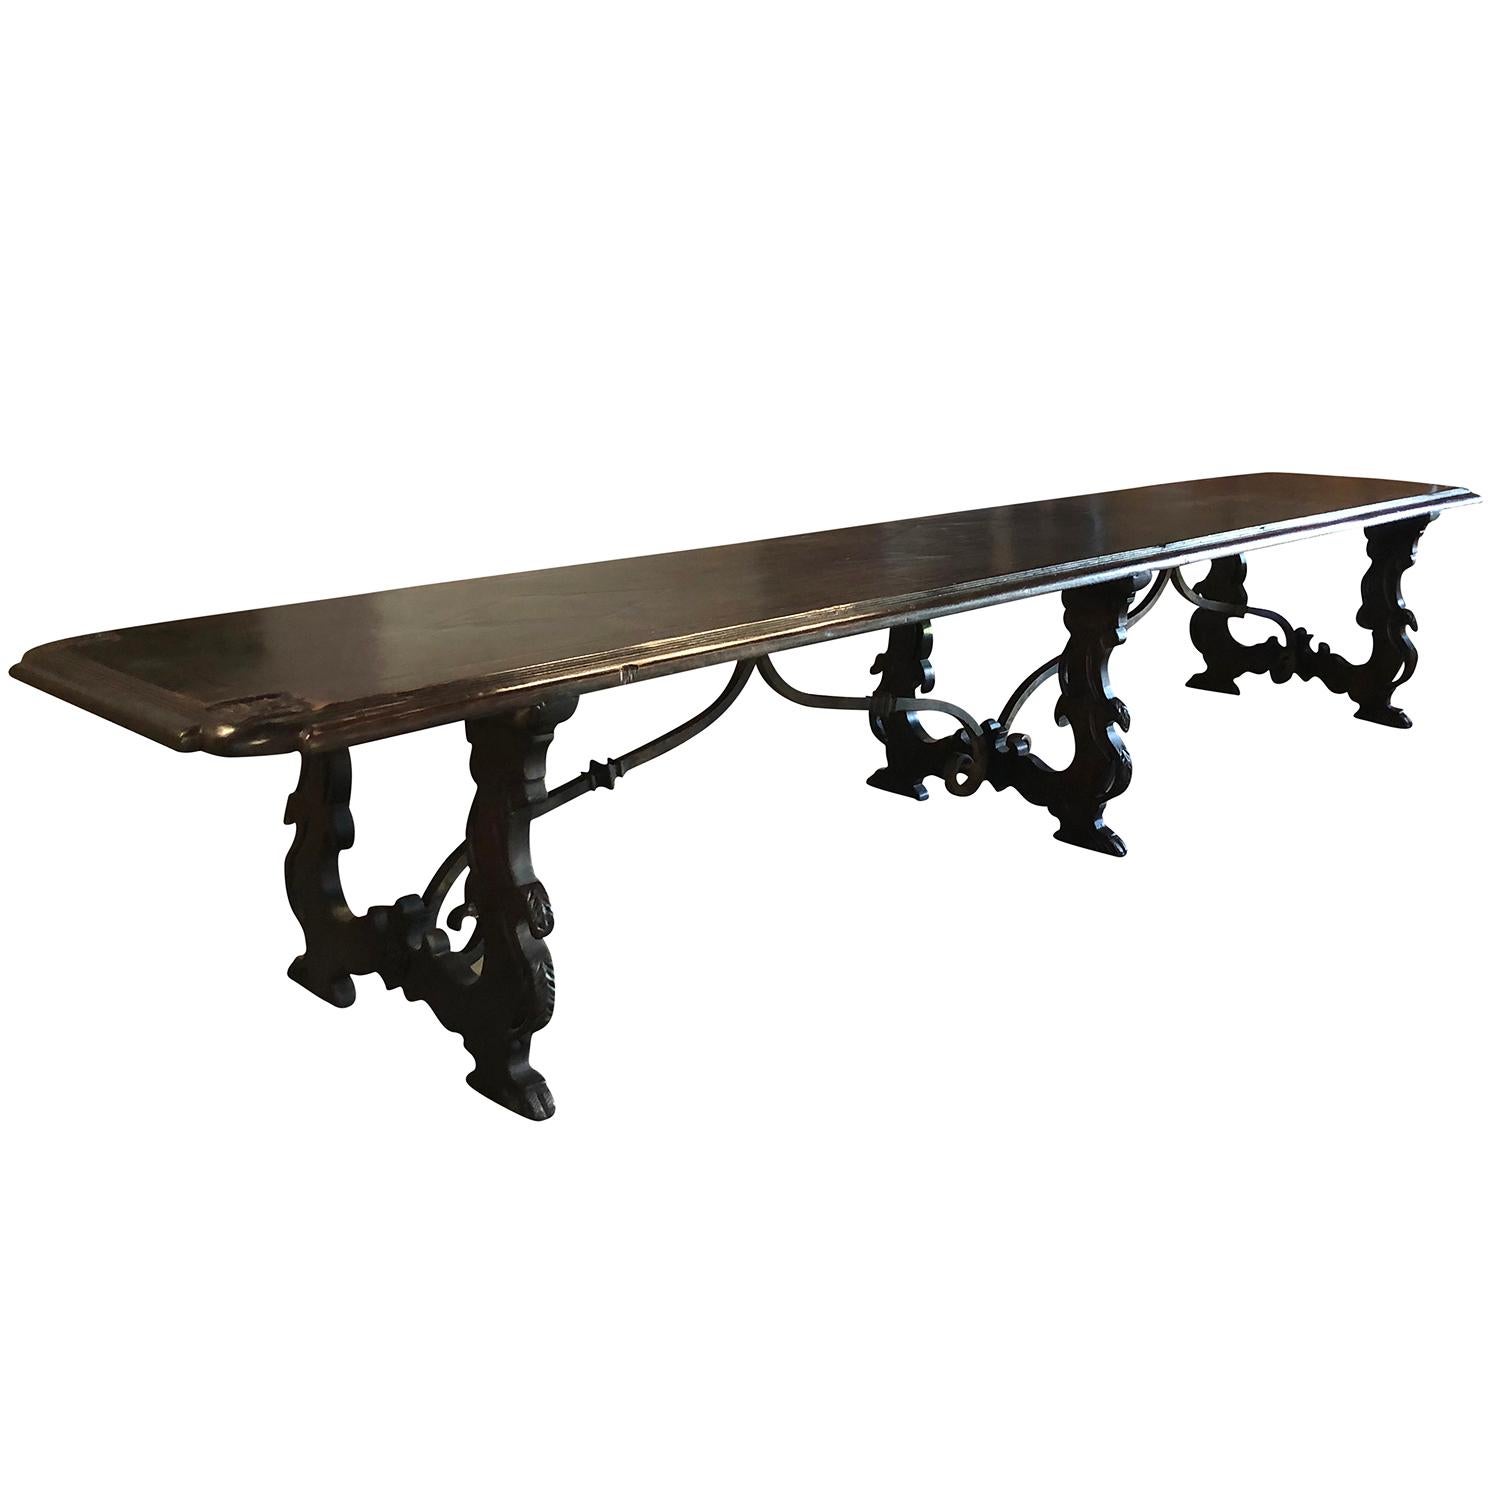 Renaissance 17th Century Italian Refectory Table - Antique Large Walnut Dining Table 